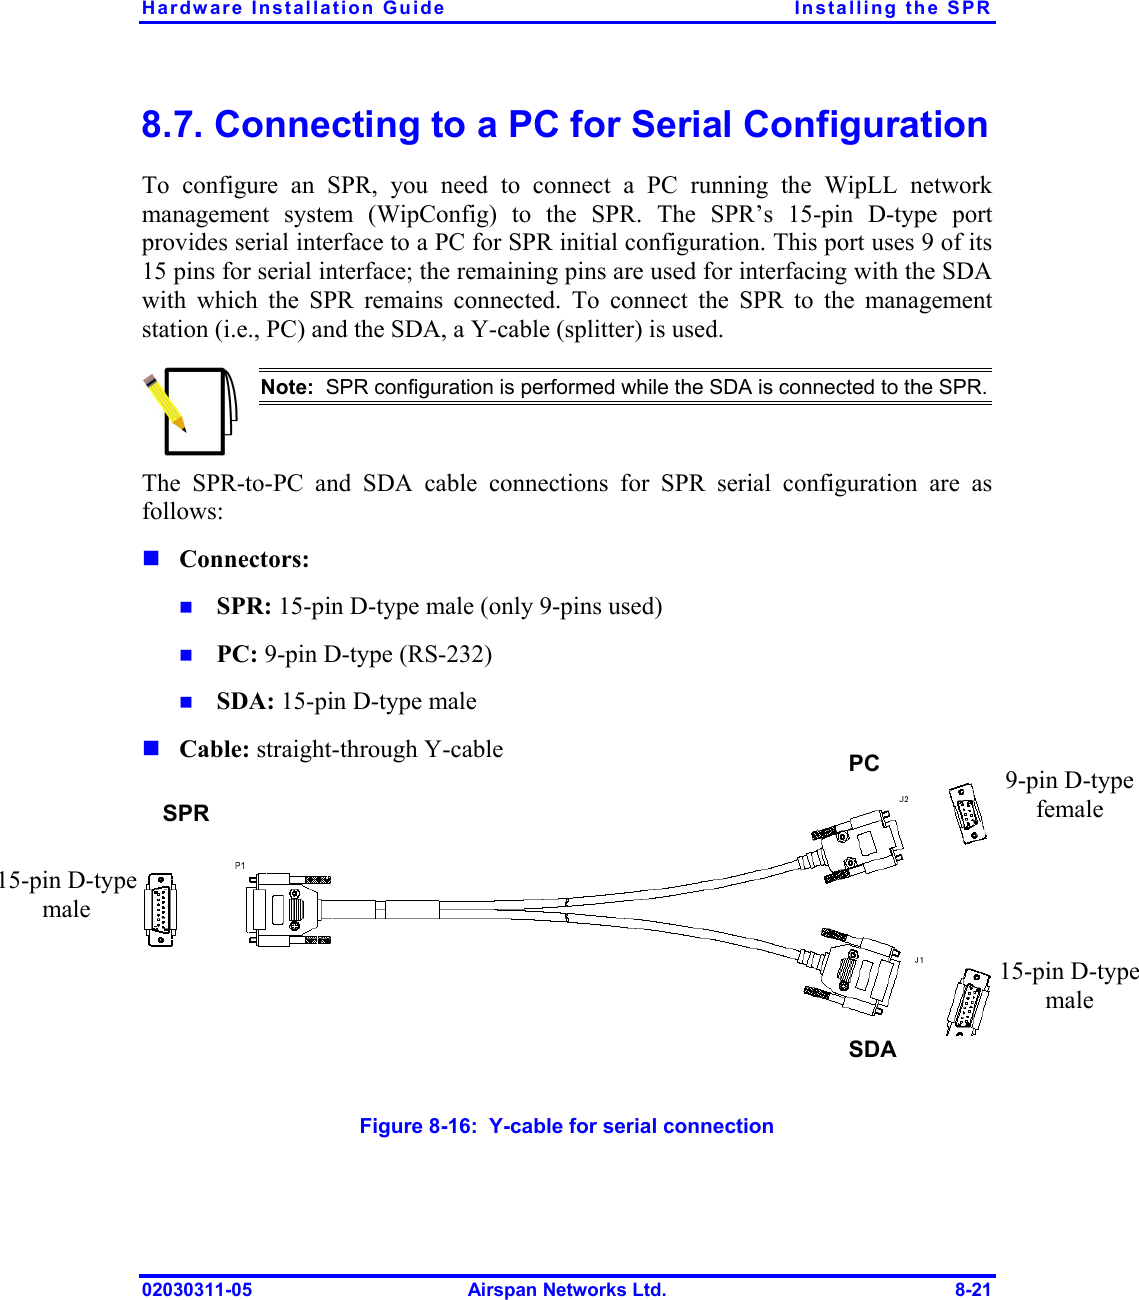 Hardware Installation Guide  Installing the SPR 02030311-05  Airspan Networks Ltd.  8-21 8.7. Connecting to a PC for Serial Configuration To configure an SPR, you need to connect a PC running the WipLL network management system (WipConfig) to the SPR. The SPR’s 15-pin D-type port provides serial interface to a PC for SPR initial configuration. This port uses 9 of its 15 pins for serial interface; the remaining pins are used for interfacing with the SDA with which the SPR remains connected. To connect the SPR to the management station (i.e., PC) and the SDA, a Y-cable (splitter) is used.  Note:  SPR configuration is performed while the SDA is connected to the SPR.The SPR-to-PC and SDA cable connections for SPR serial configuration are as follows: ! Connectors: !  SPR: 15-pin D-type male (only 9-pins used) !  PC: 9-pin D-type (RS-232) !  SDA: 15-pin D-type male ! Cable: straight-through Y-cable   Figure  8-16:  Y-cable for serial connection 15-pin D-type male  PC SDA  15-pin D-typemale 9-pin D-typefemale  SPR 